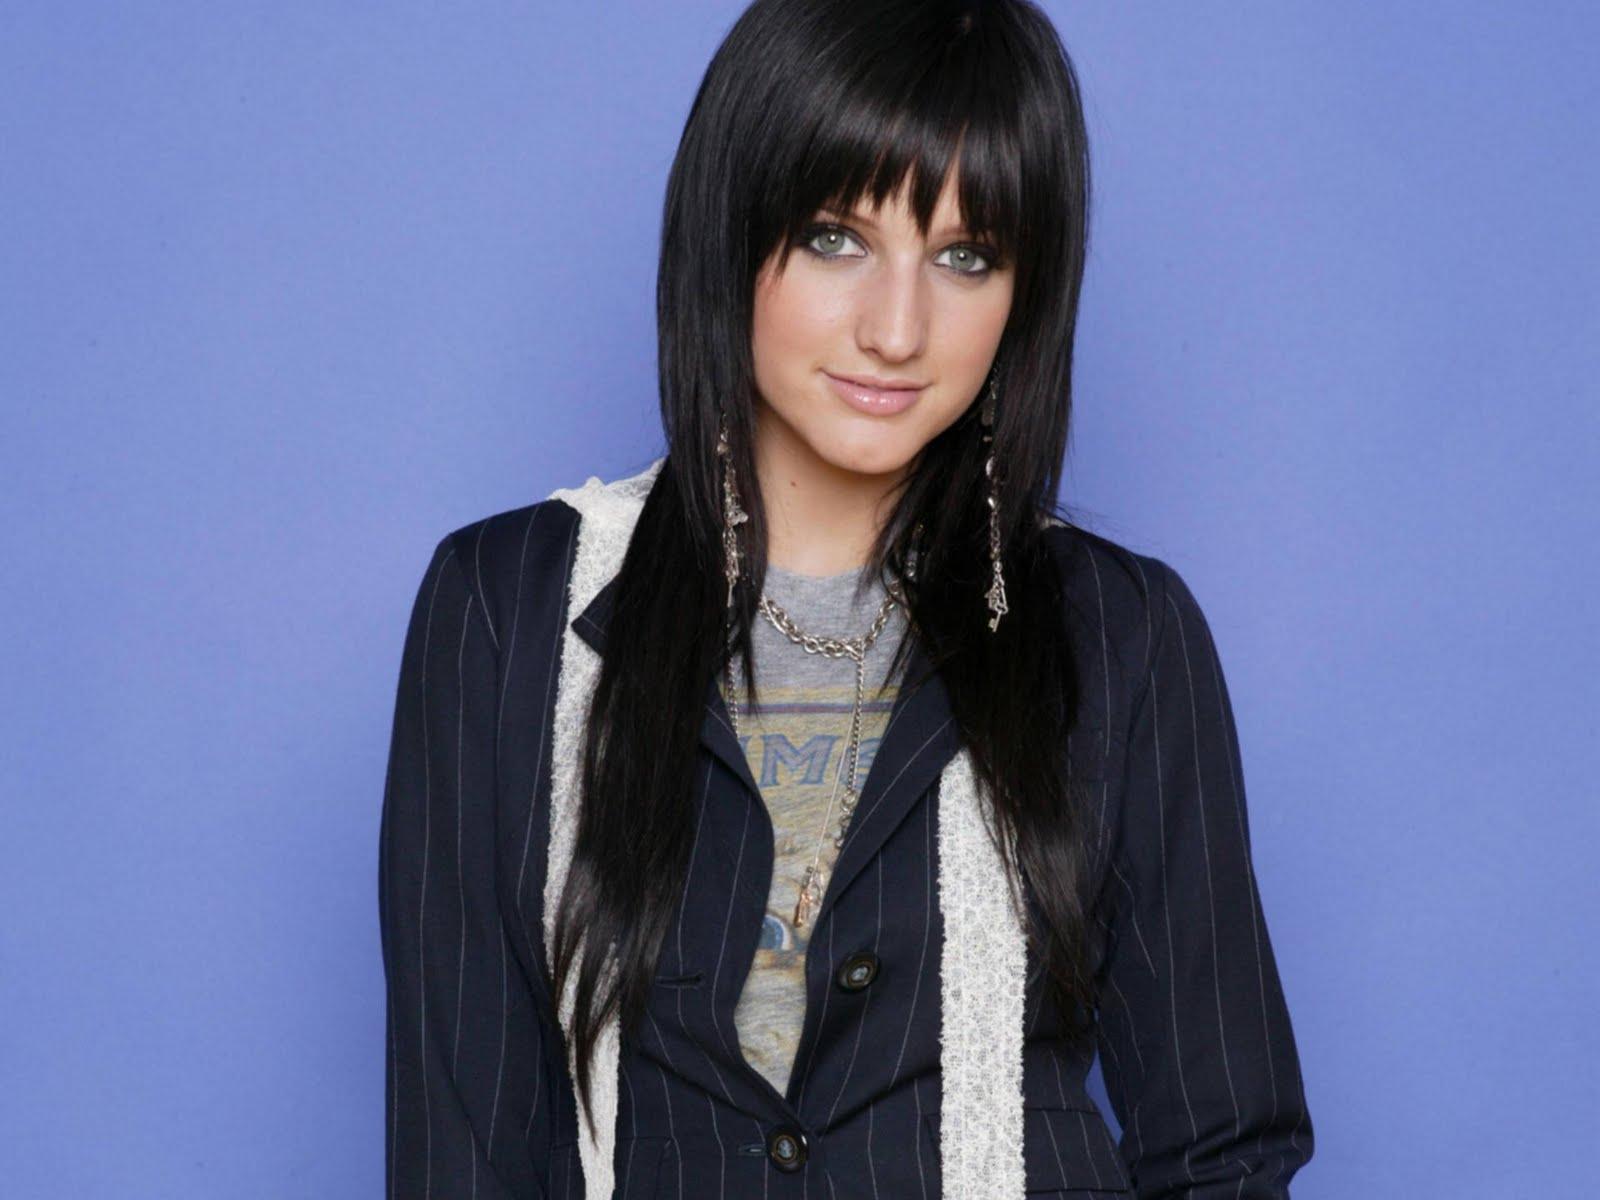 Ashlee Simpson Hot Picture, Photo Gallery & Wallpaper: Hot Ashlee